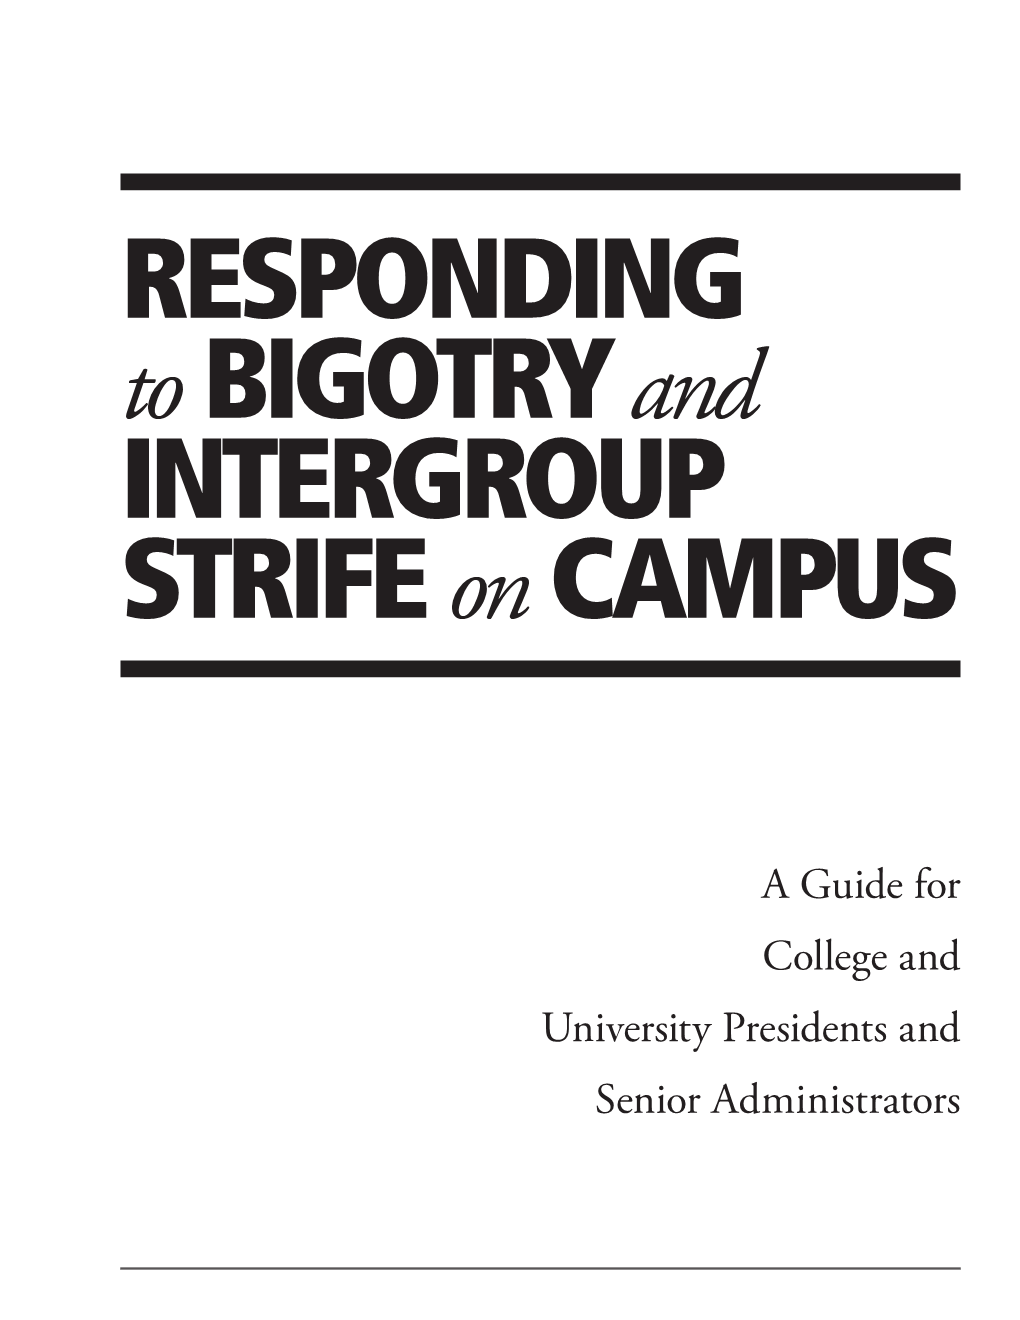 RESPONDING to BIGOTRY and INTERGROUP STRIFE on CAMPUS